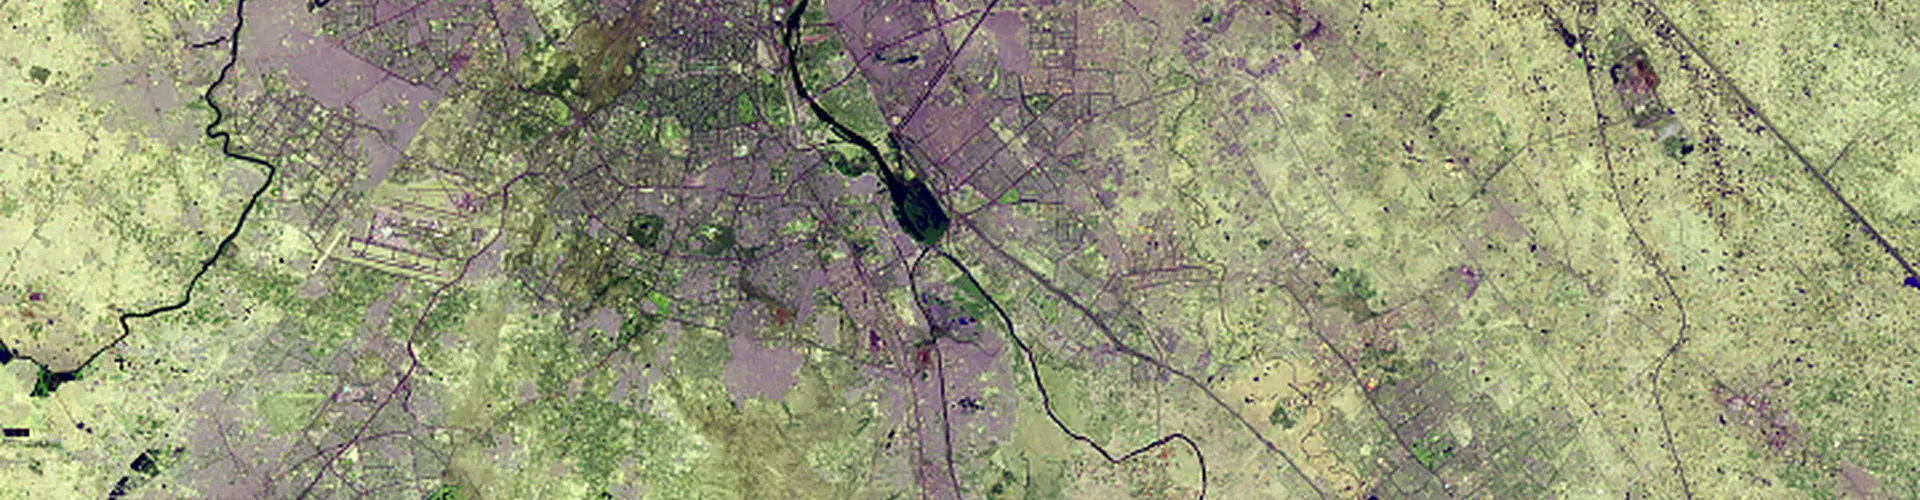 Delhi, India and environs (Credit: NASA Earth Observatory images by Lauren Dauphin, using Landsat data from the U.S. Geological Survey)